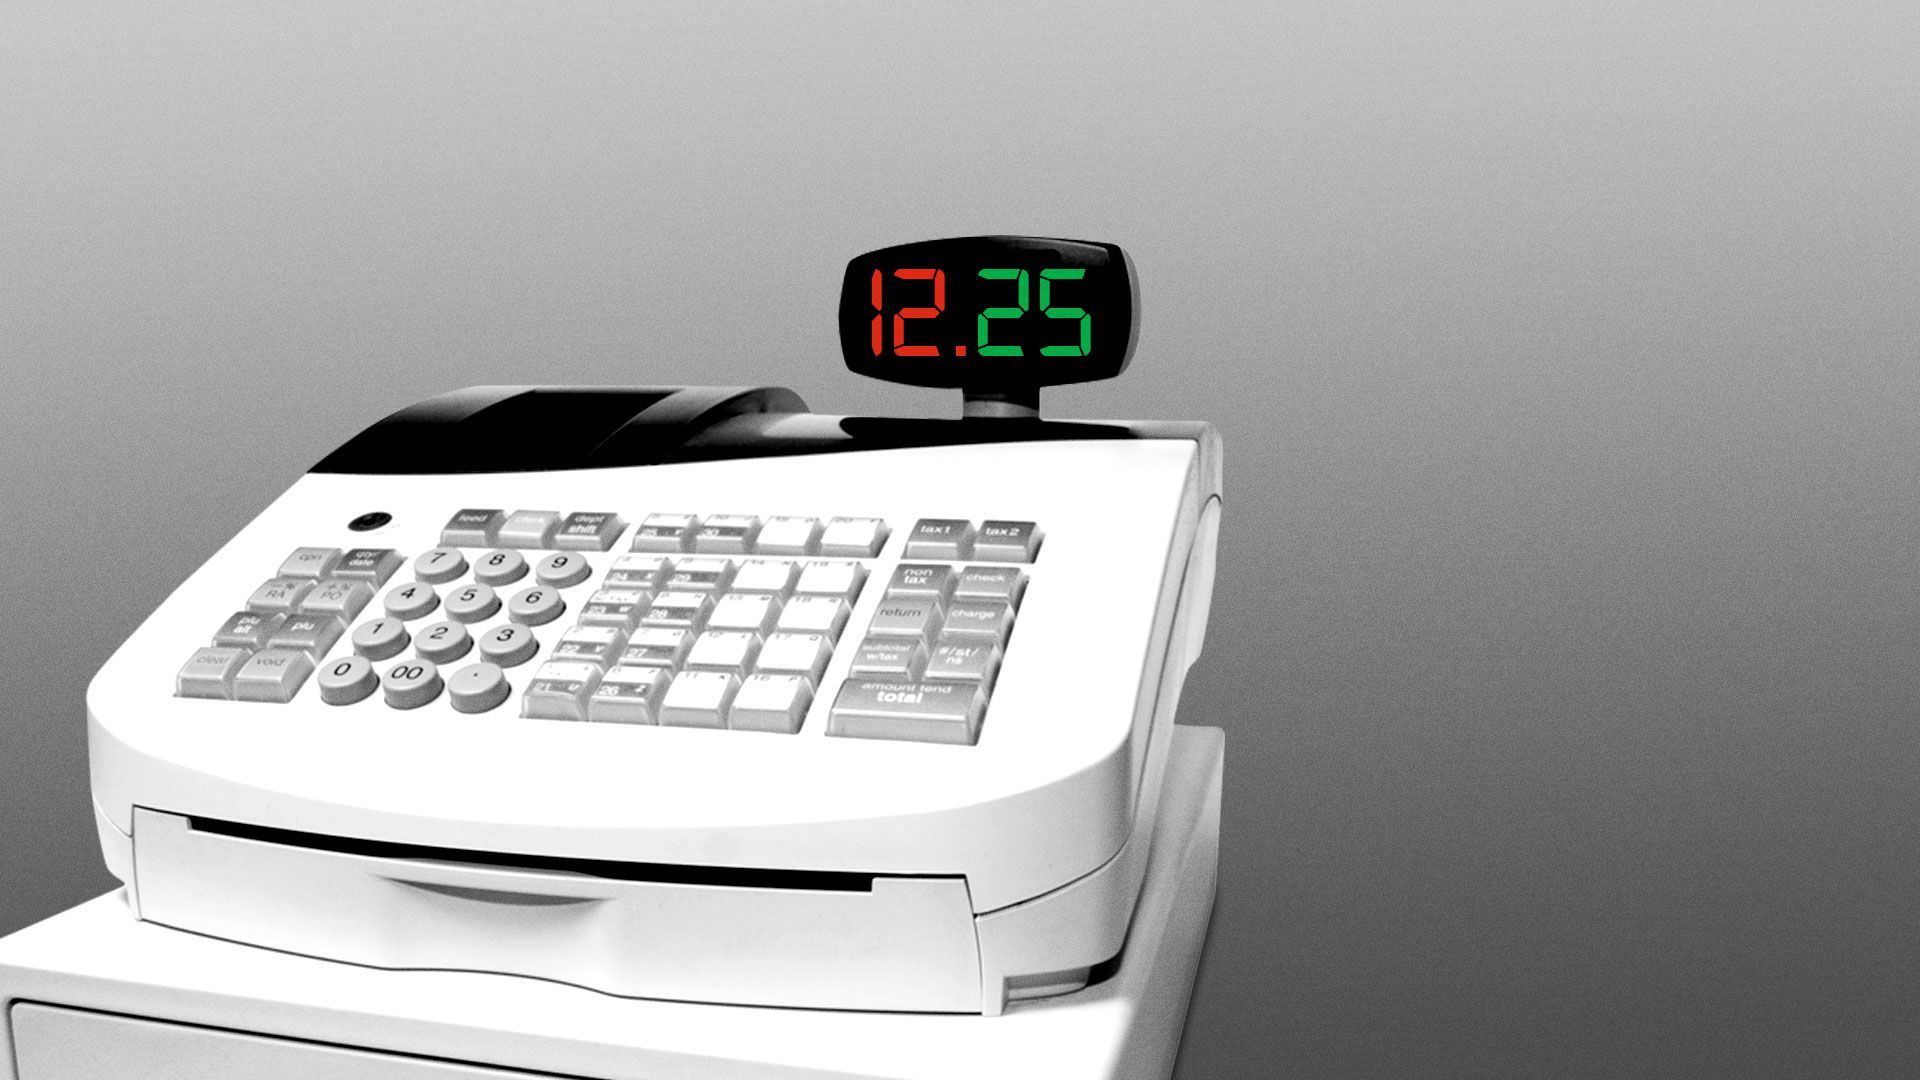 Illustration of a cash register with the date 12-25 on the display